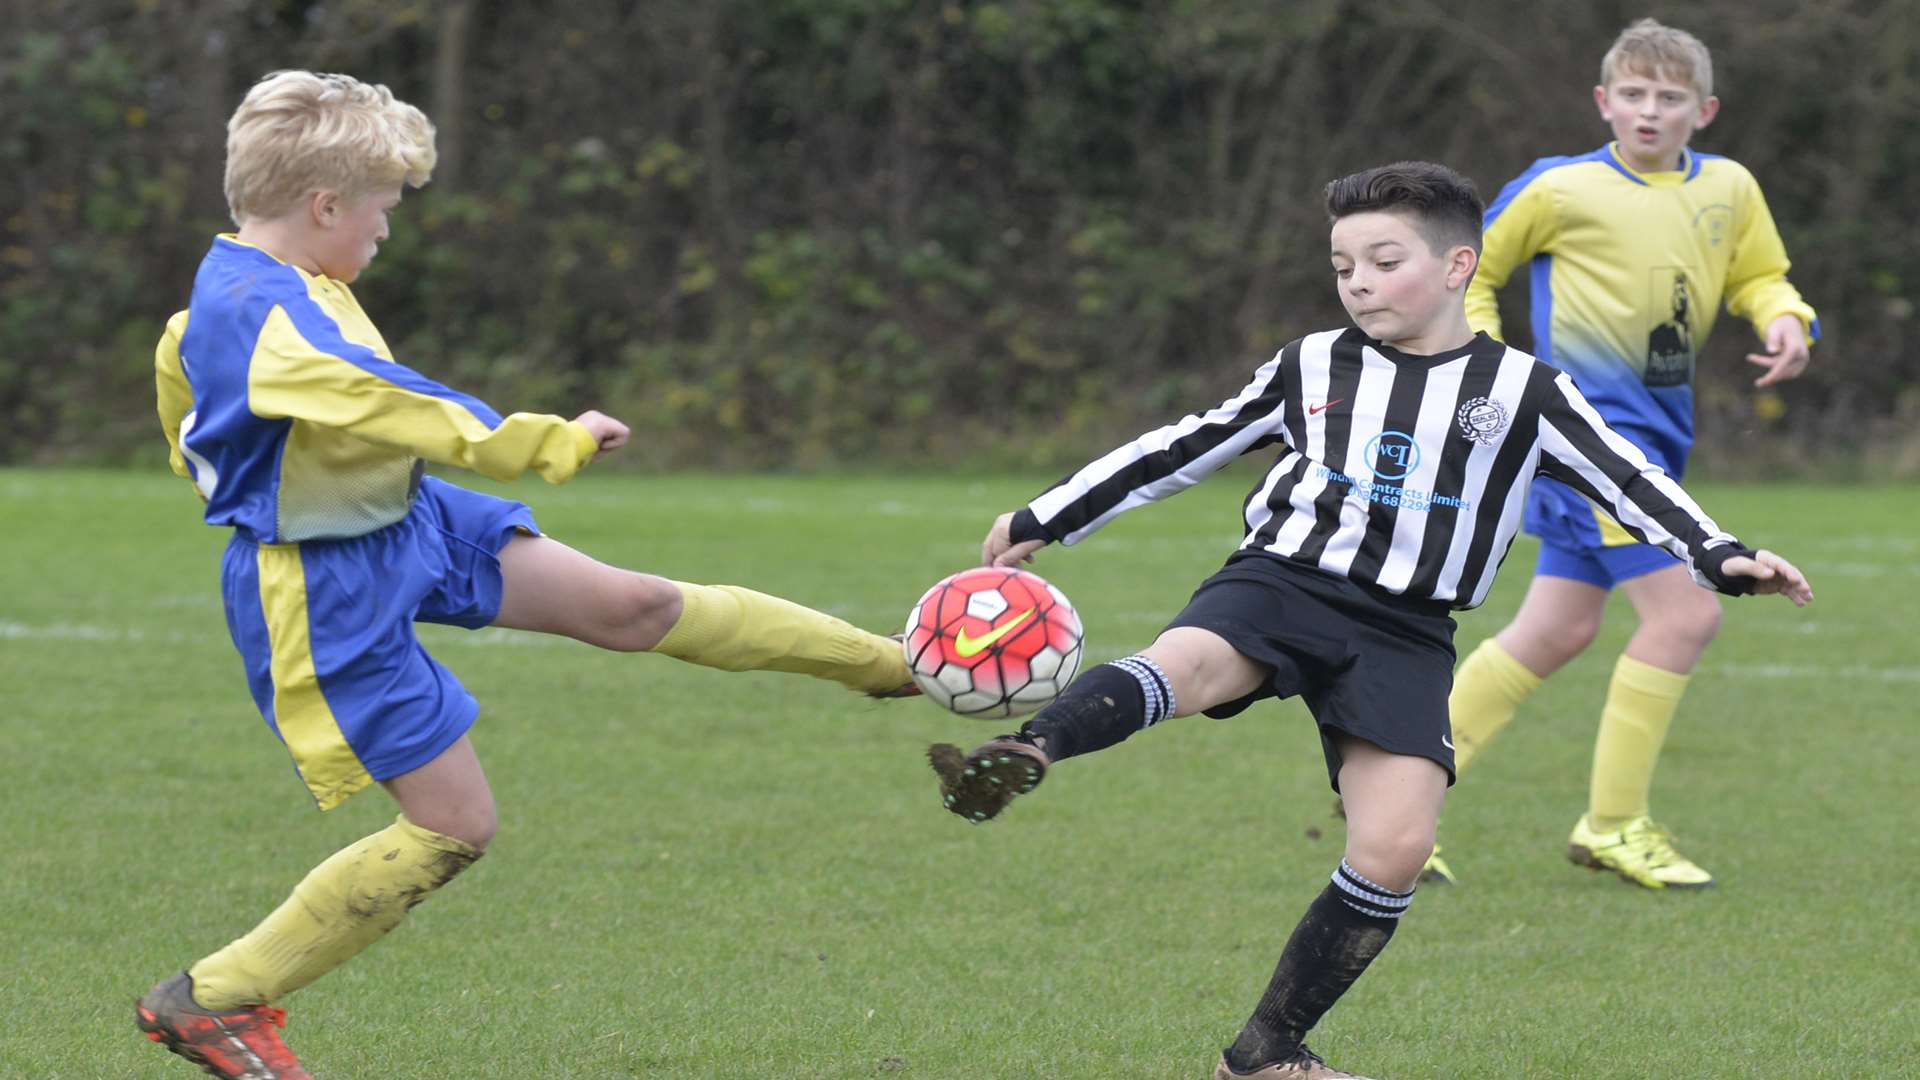 Real 60 Jaguars under-12s (stripes) challenge Sheerness East Youth in Division 1 Picture: Ruth Cuerden